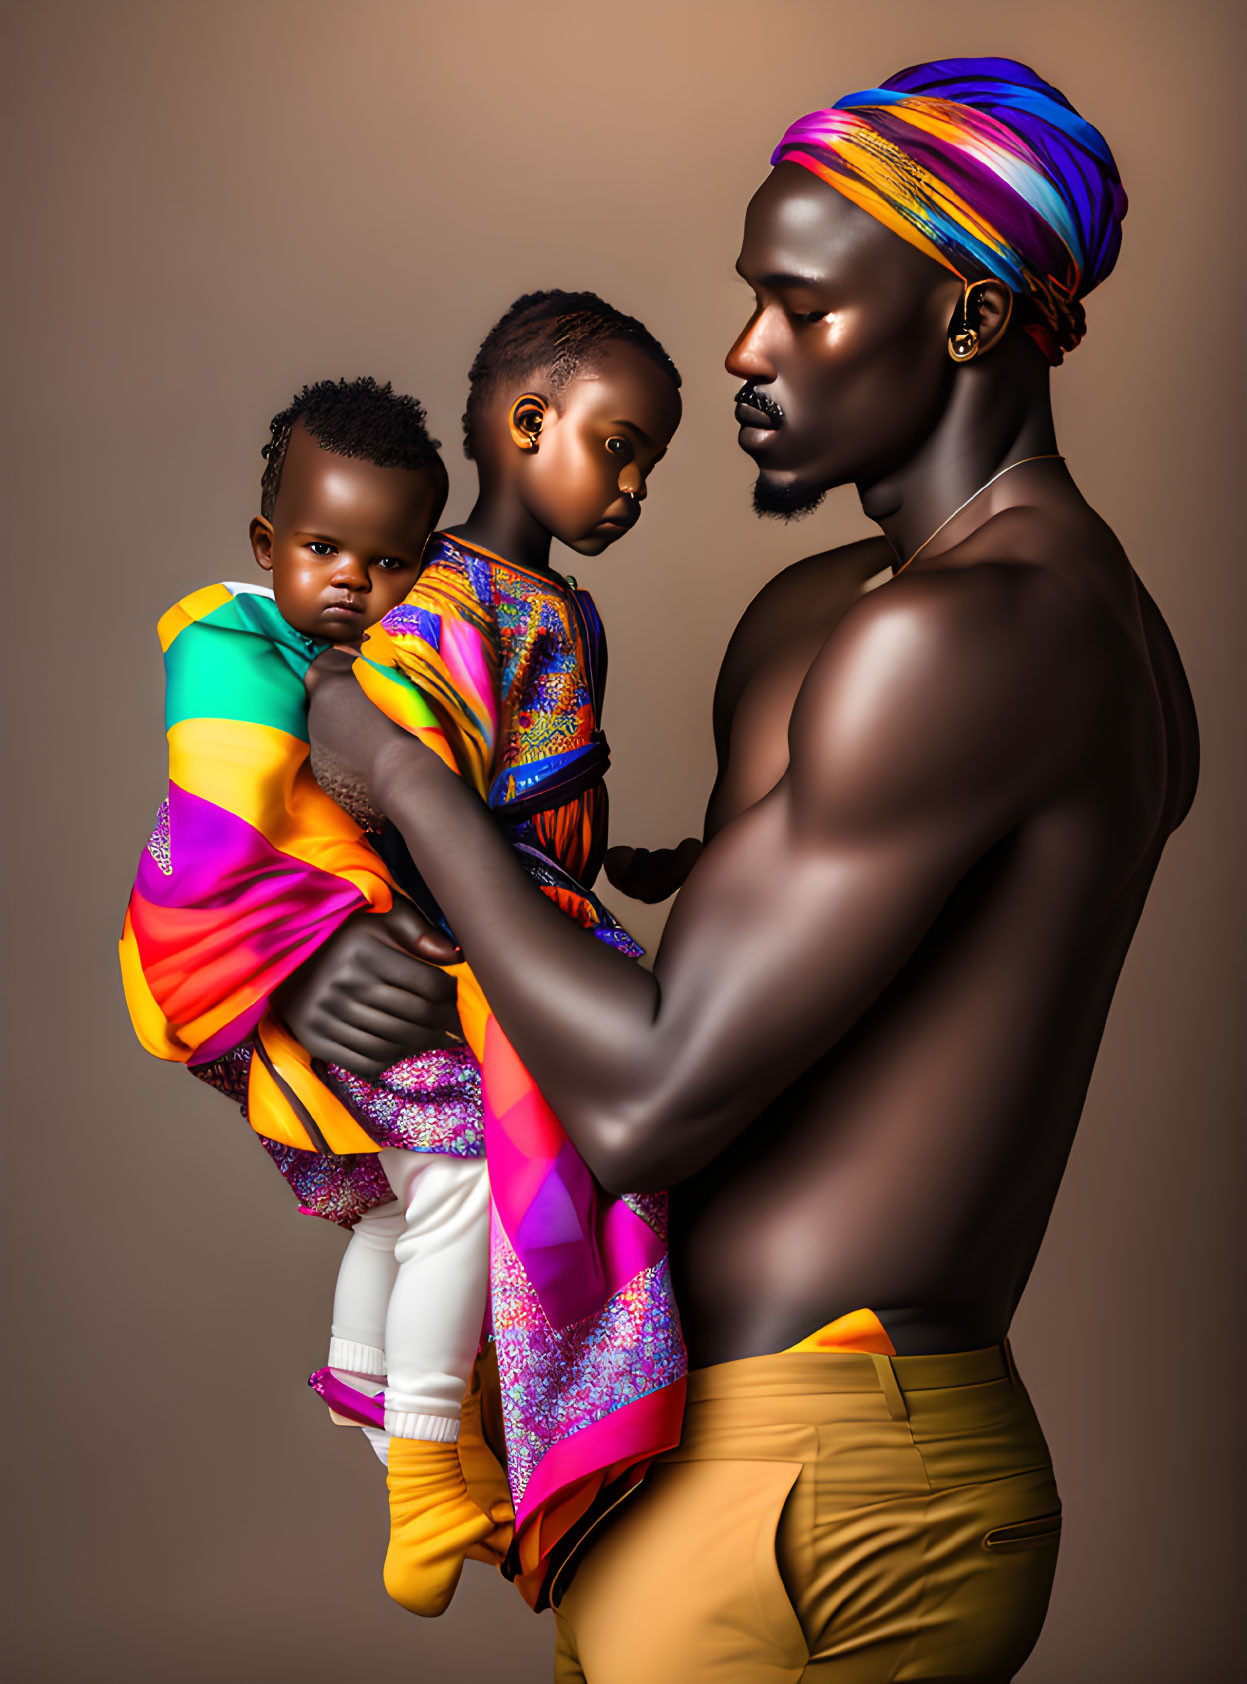 Shirtless man with head wrap holds two children against brown background